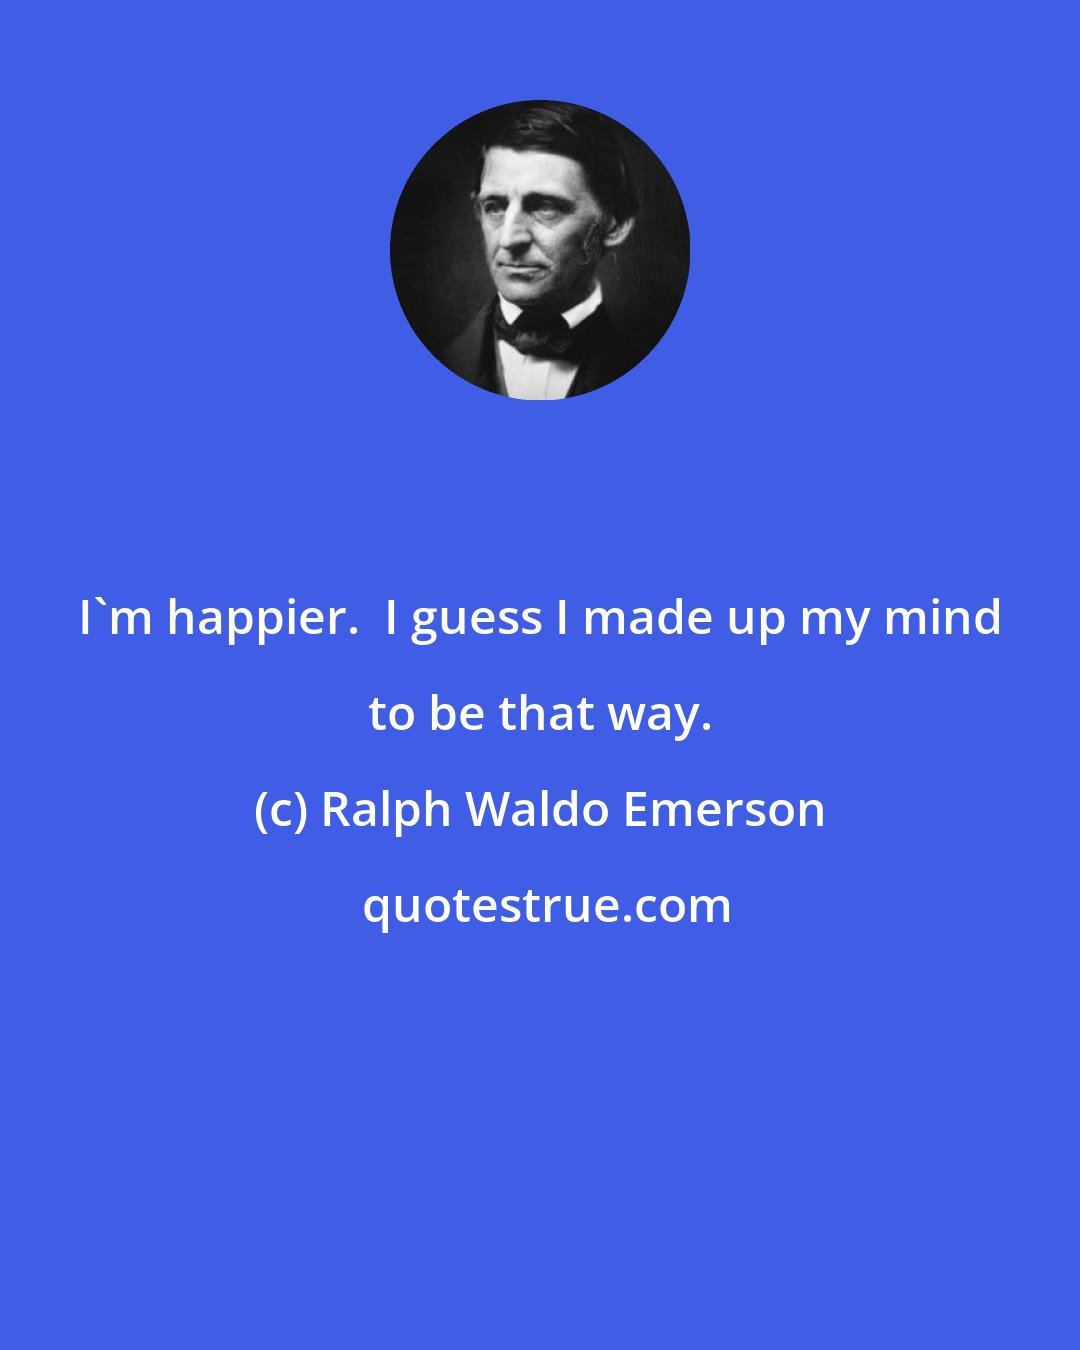 Ralph Waldo Emerson: I'm happier.  I guess I made up my mind to be that way.